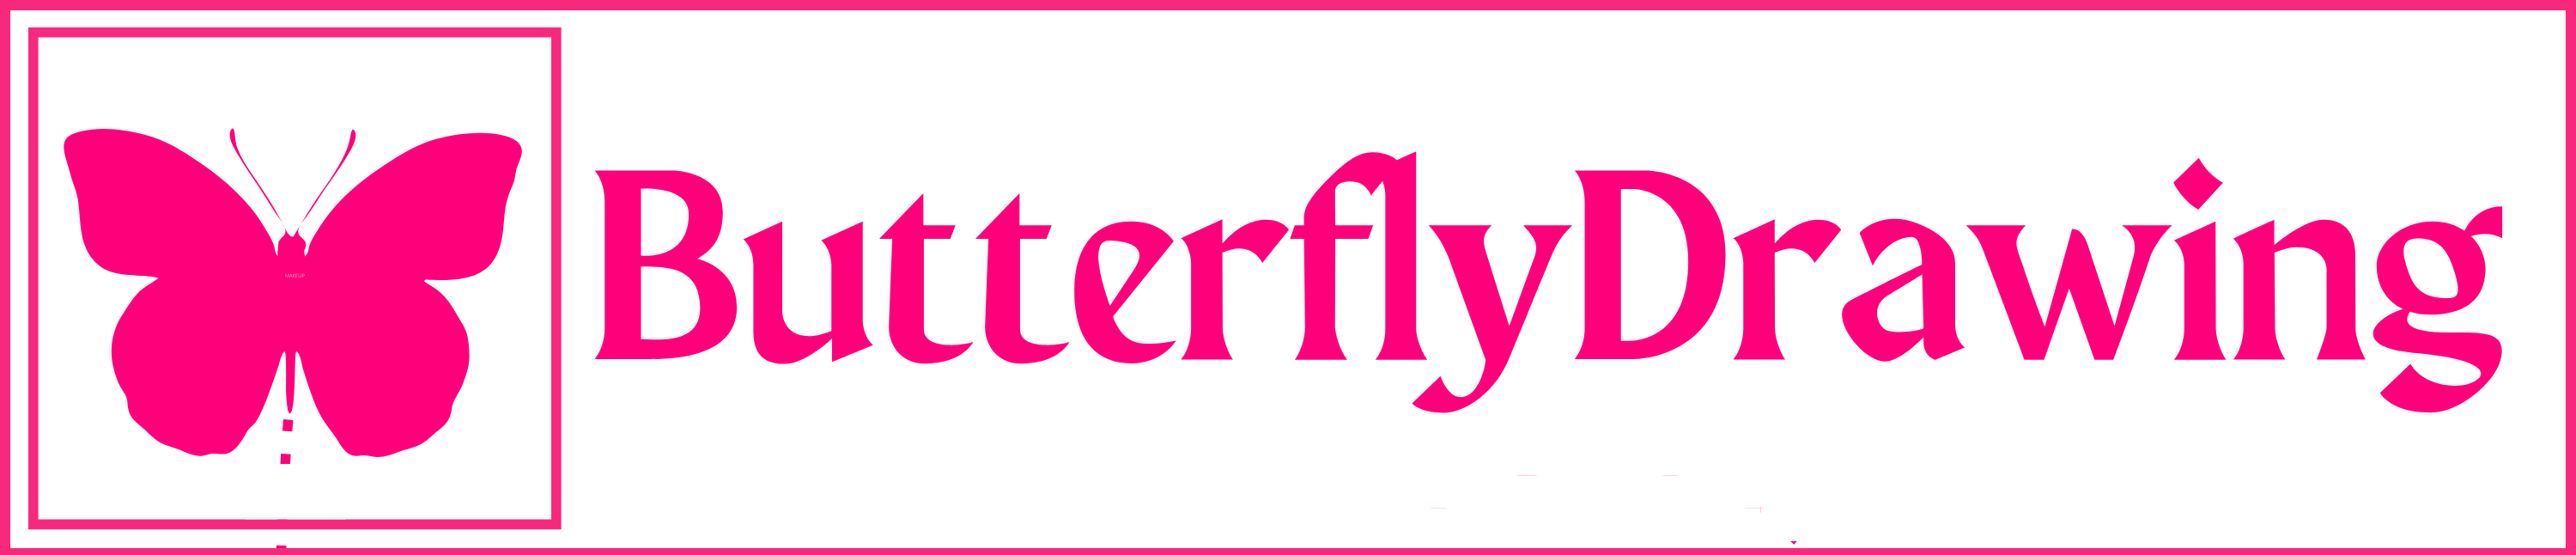 butterflydrawing.com